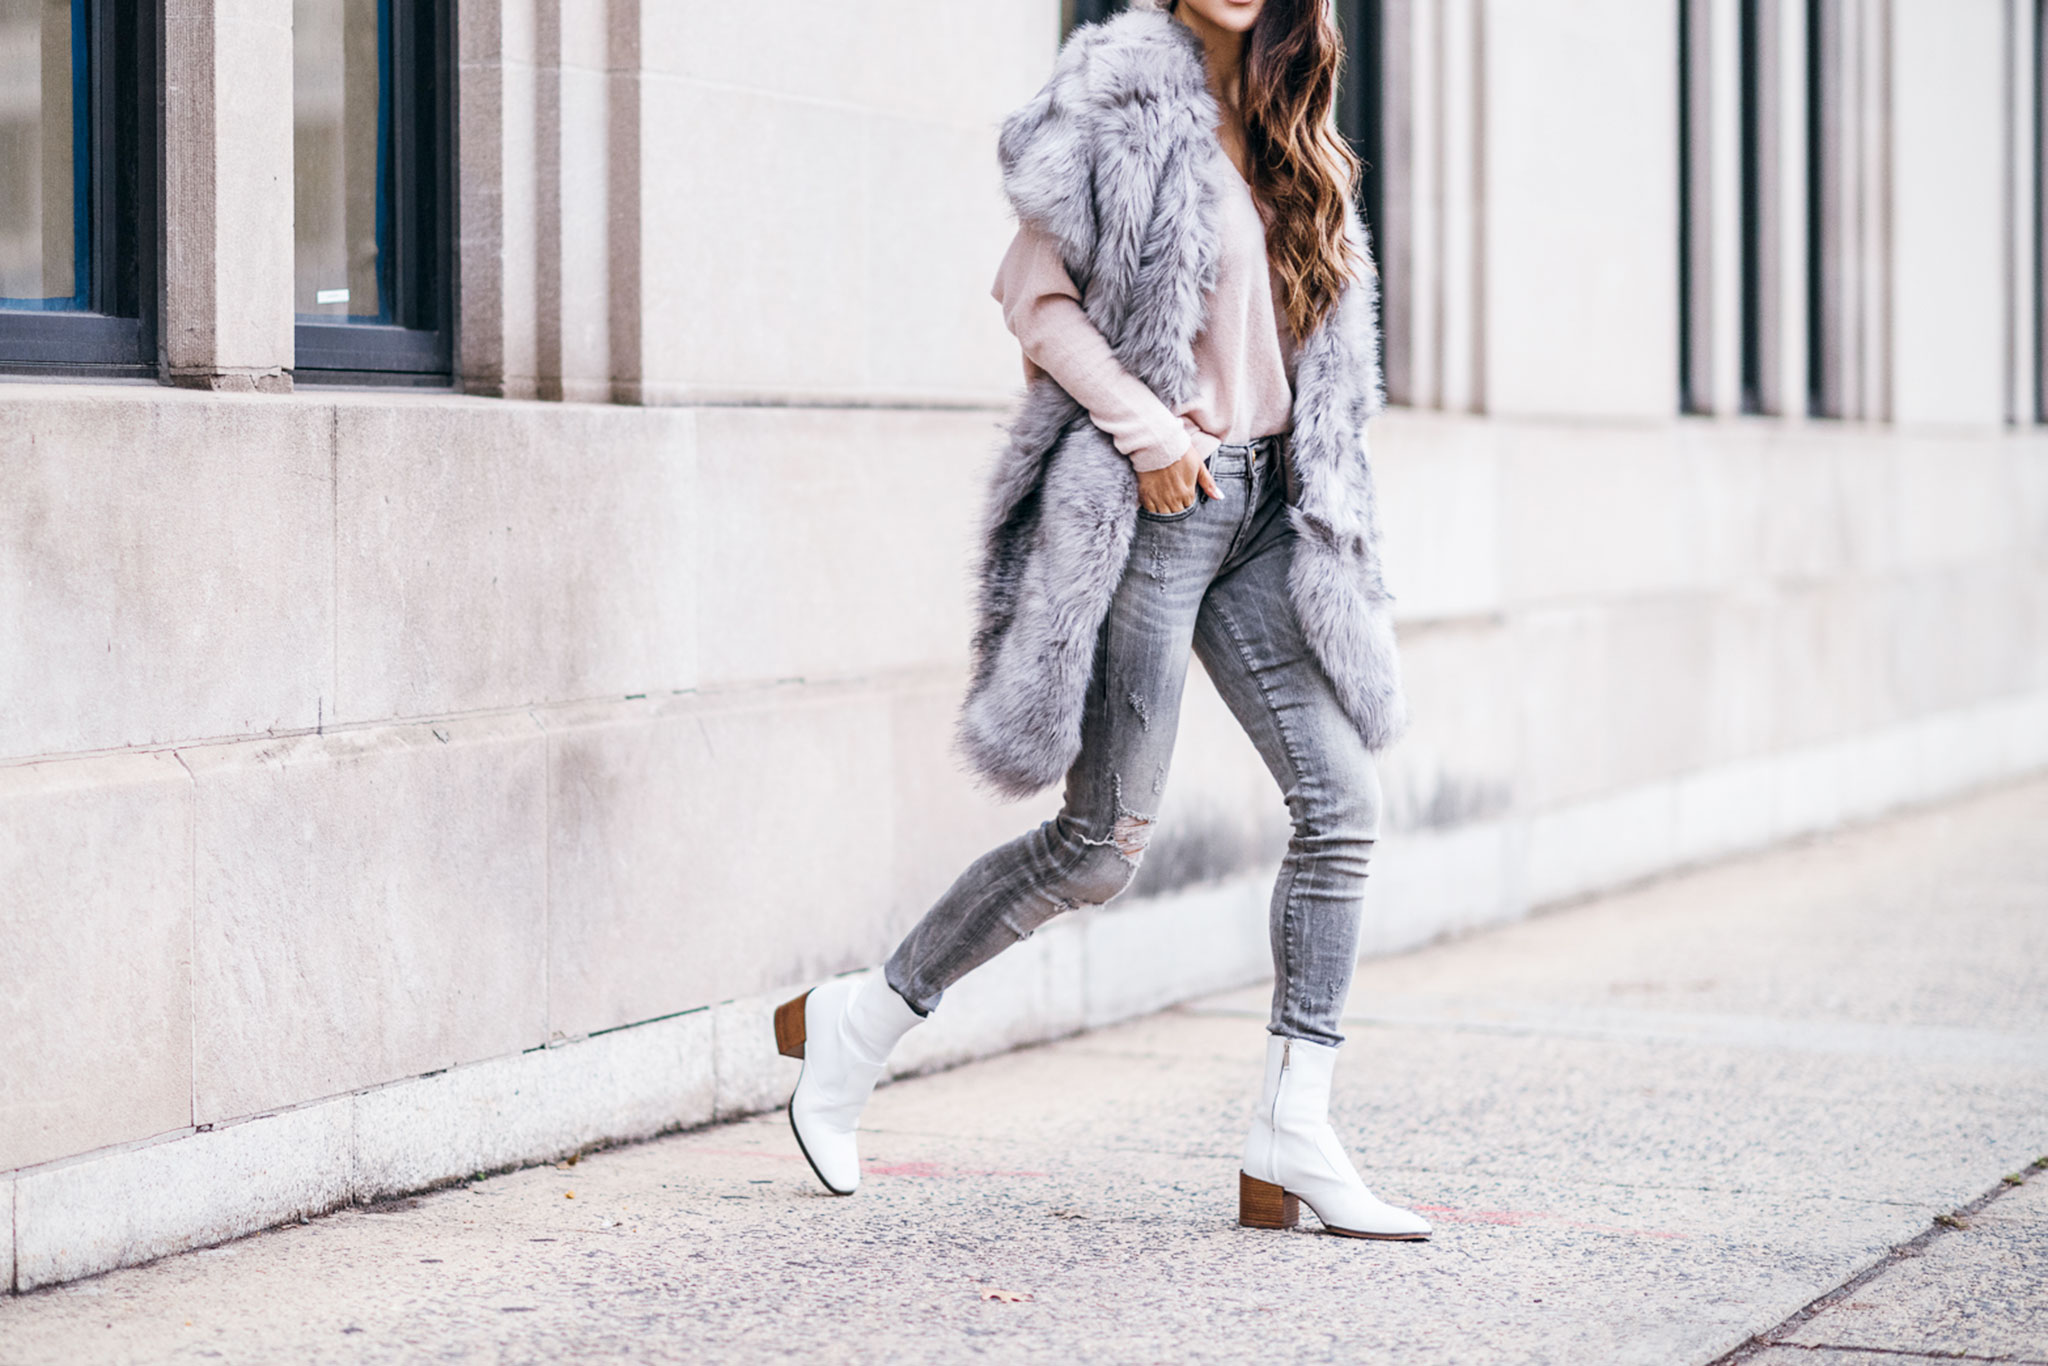 Types of Scarves To Elevate Your Look - Gray Fur Stole with White Booties // Notjessfashion.com // New York fashion blogger, asian blogger, fashion blogger street style, street style fashion, new york street style, winter outfit, cozy winter outfit, layered outfit, winter layers, gray denim, distressed denim, gray denim outfit, cute winter style, jessica wang, fur stole trend, fur stole outfits, white booties, white boot trend